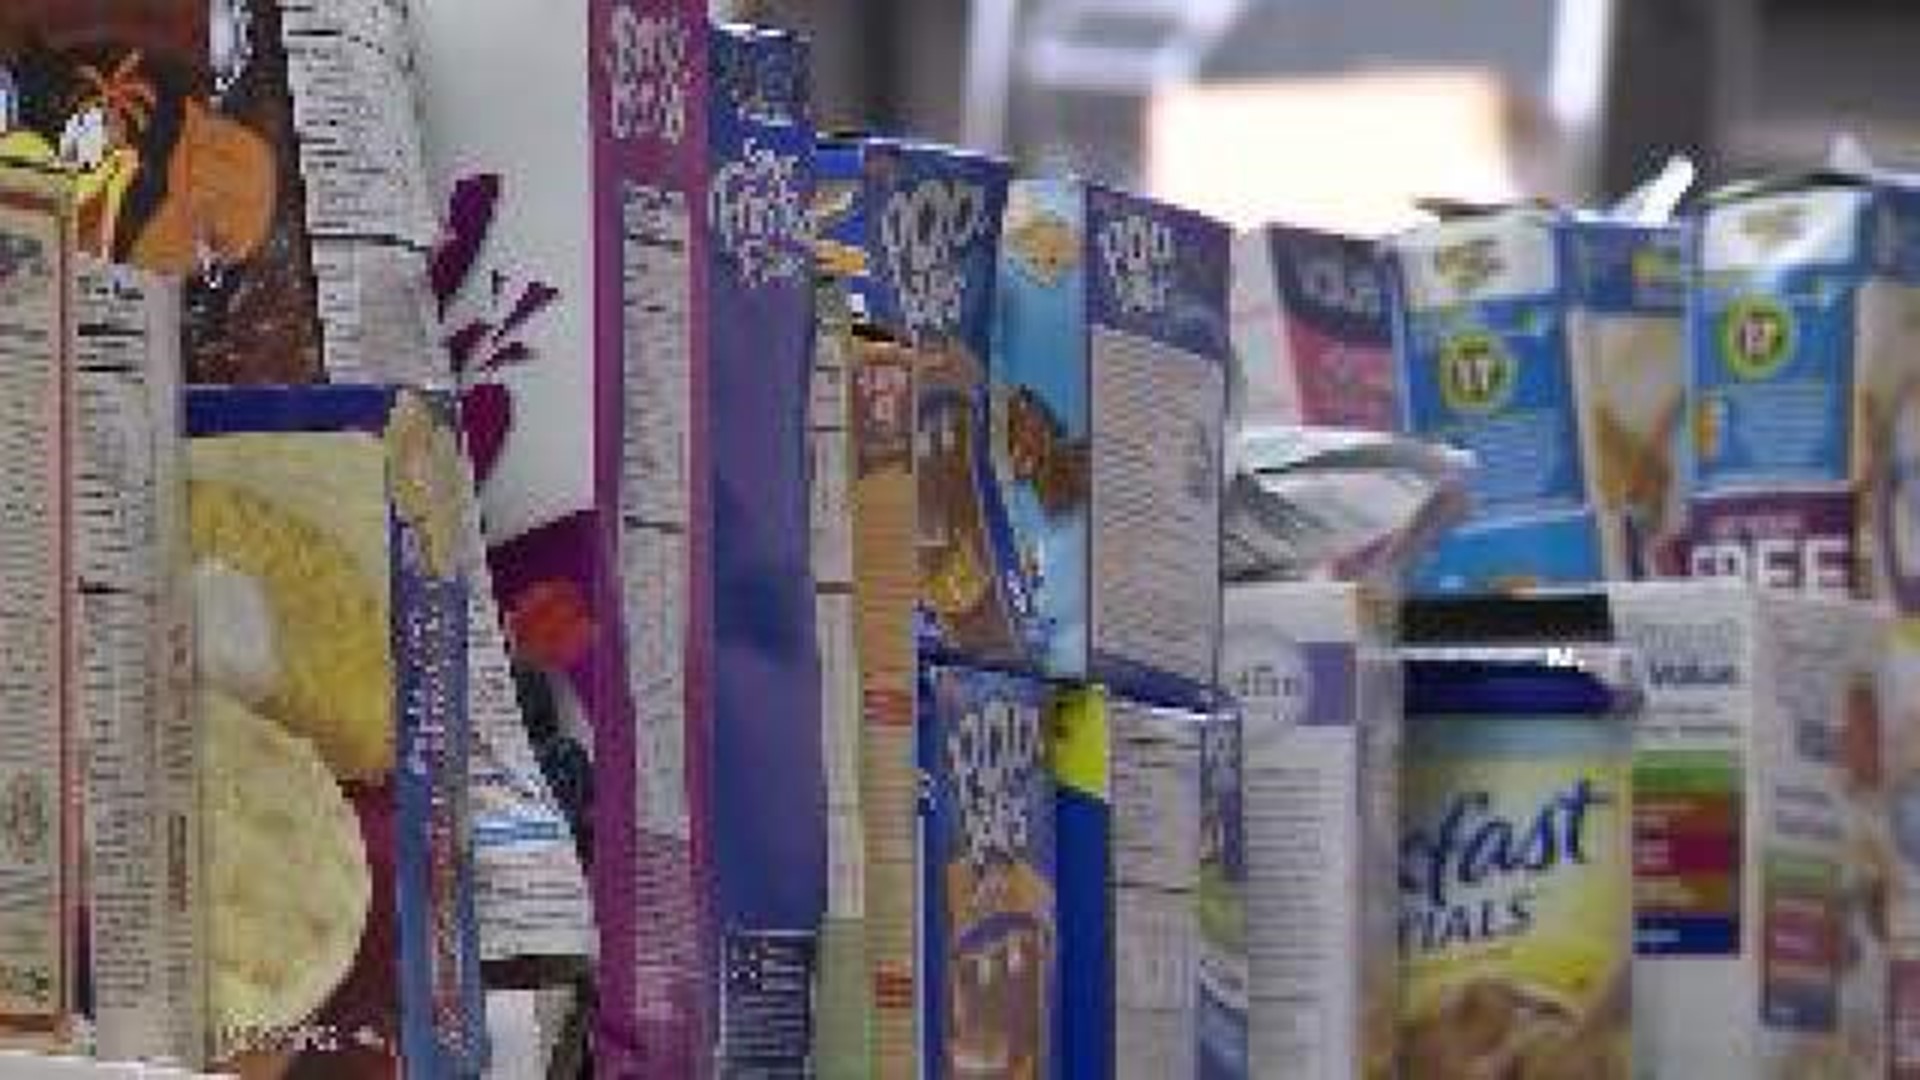 NWA Food Bank in Need of Donations